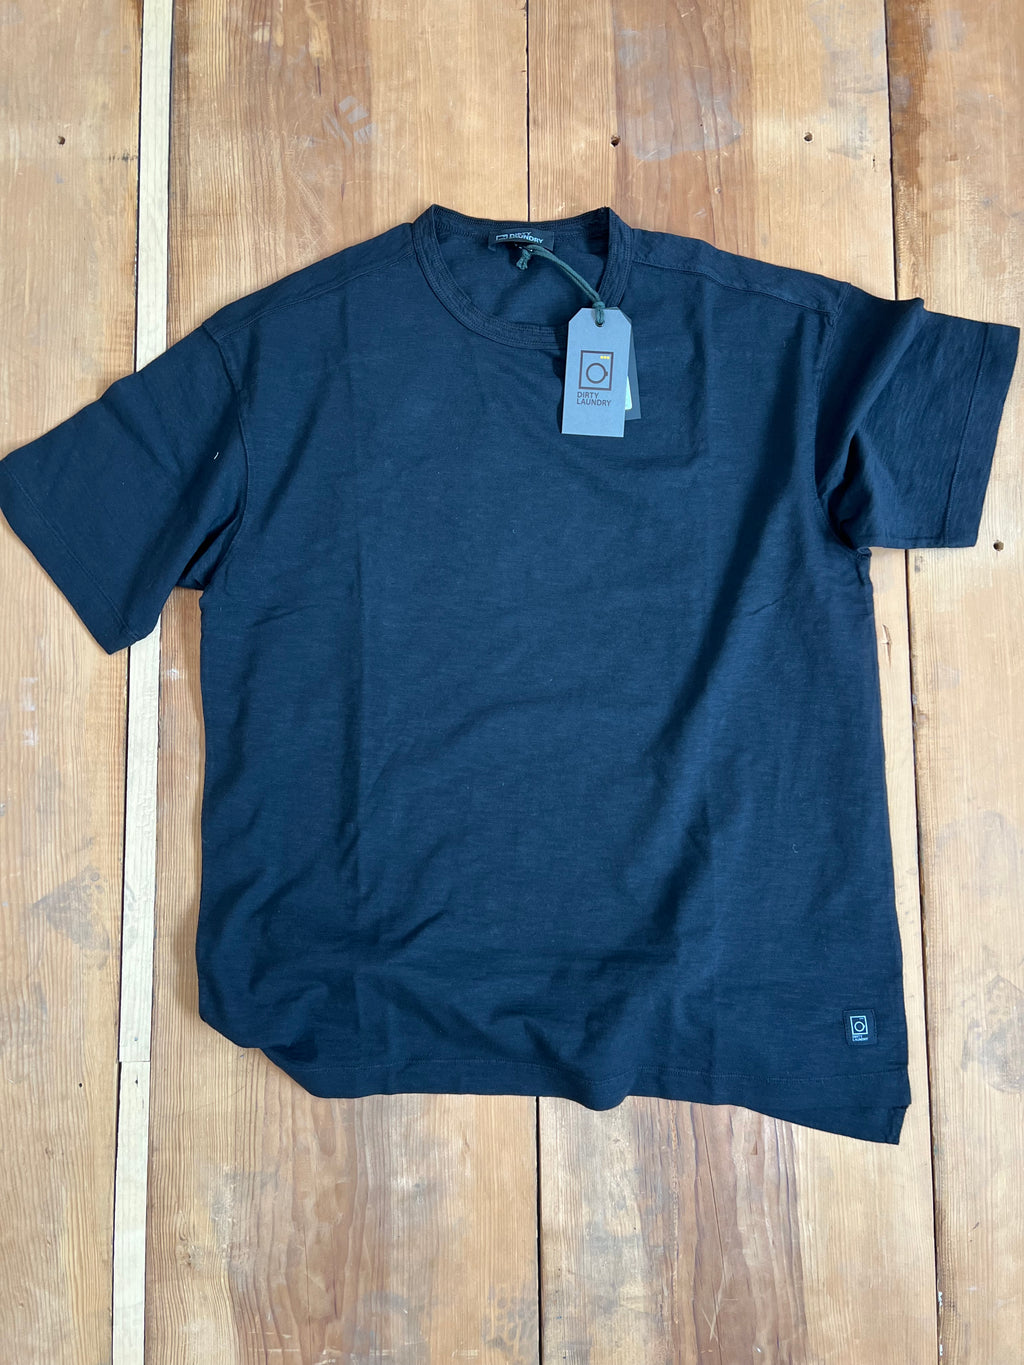 Dirty Laundry Double Layer T shirt Black